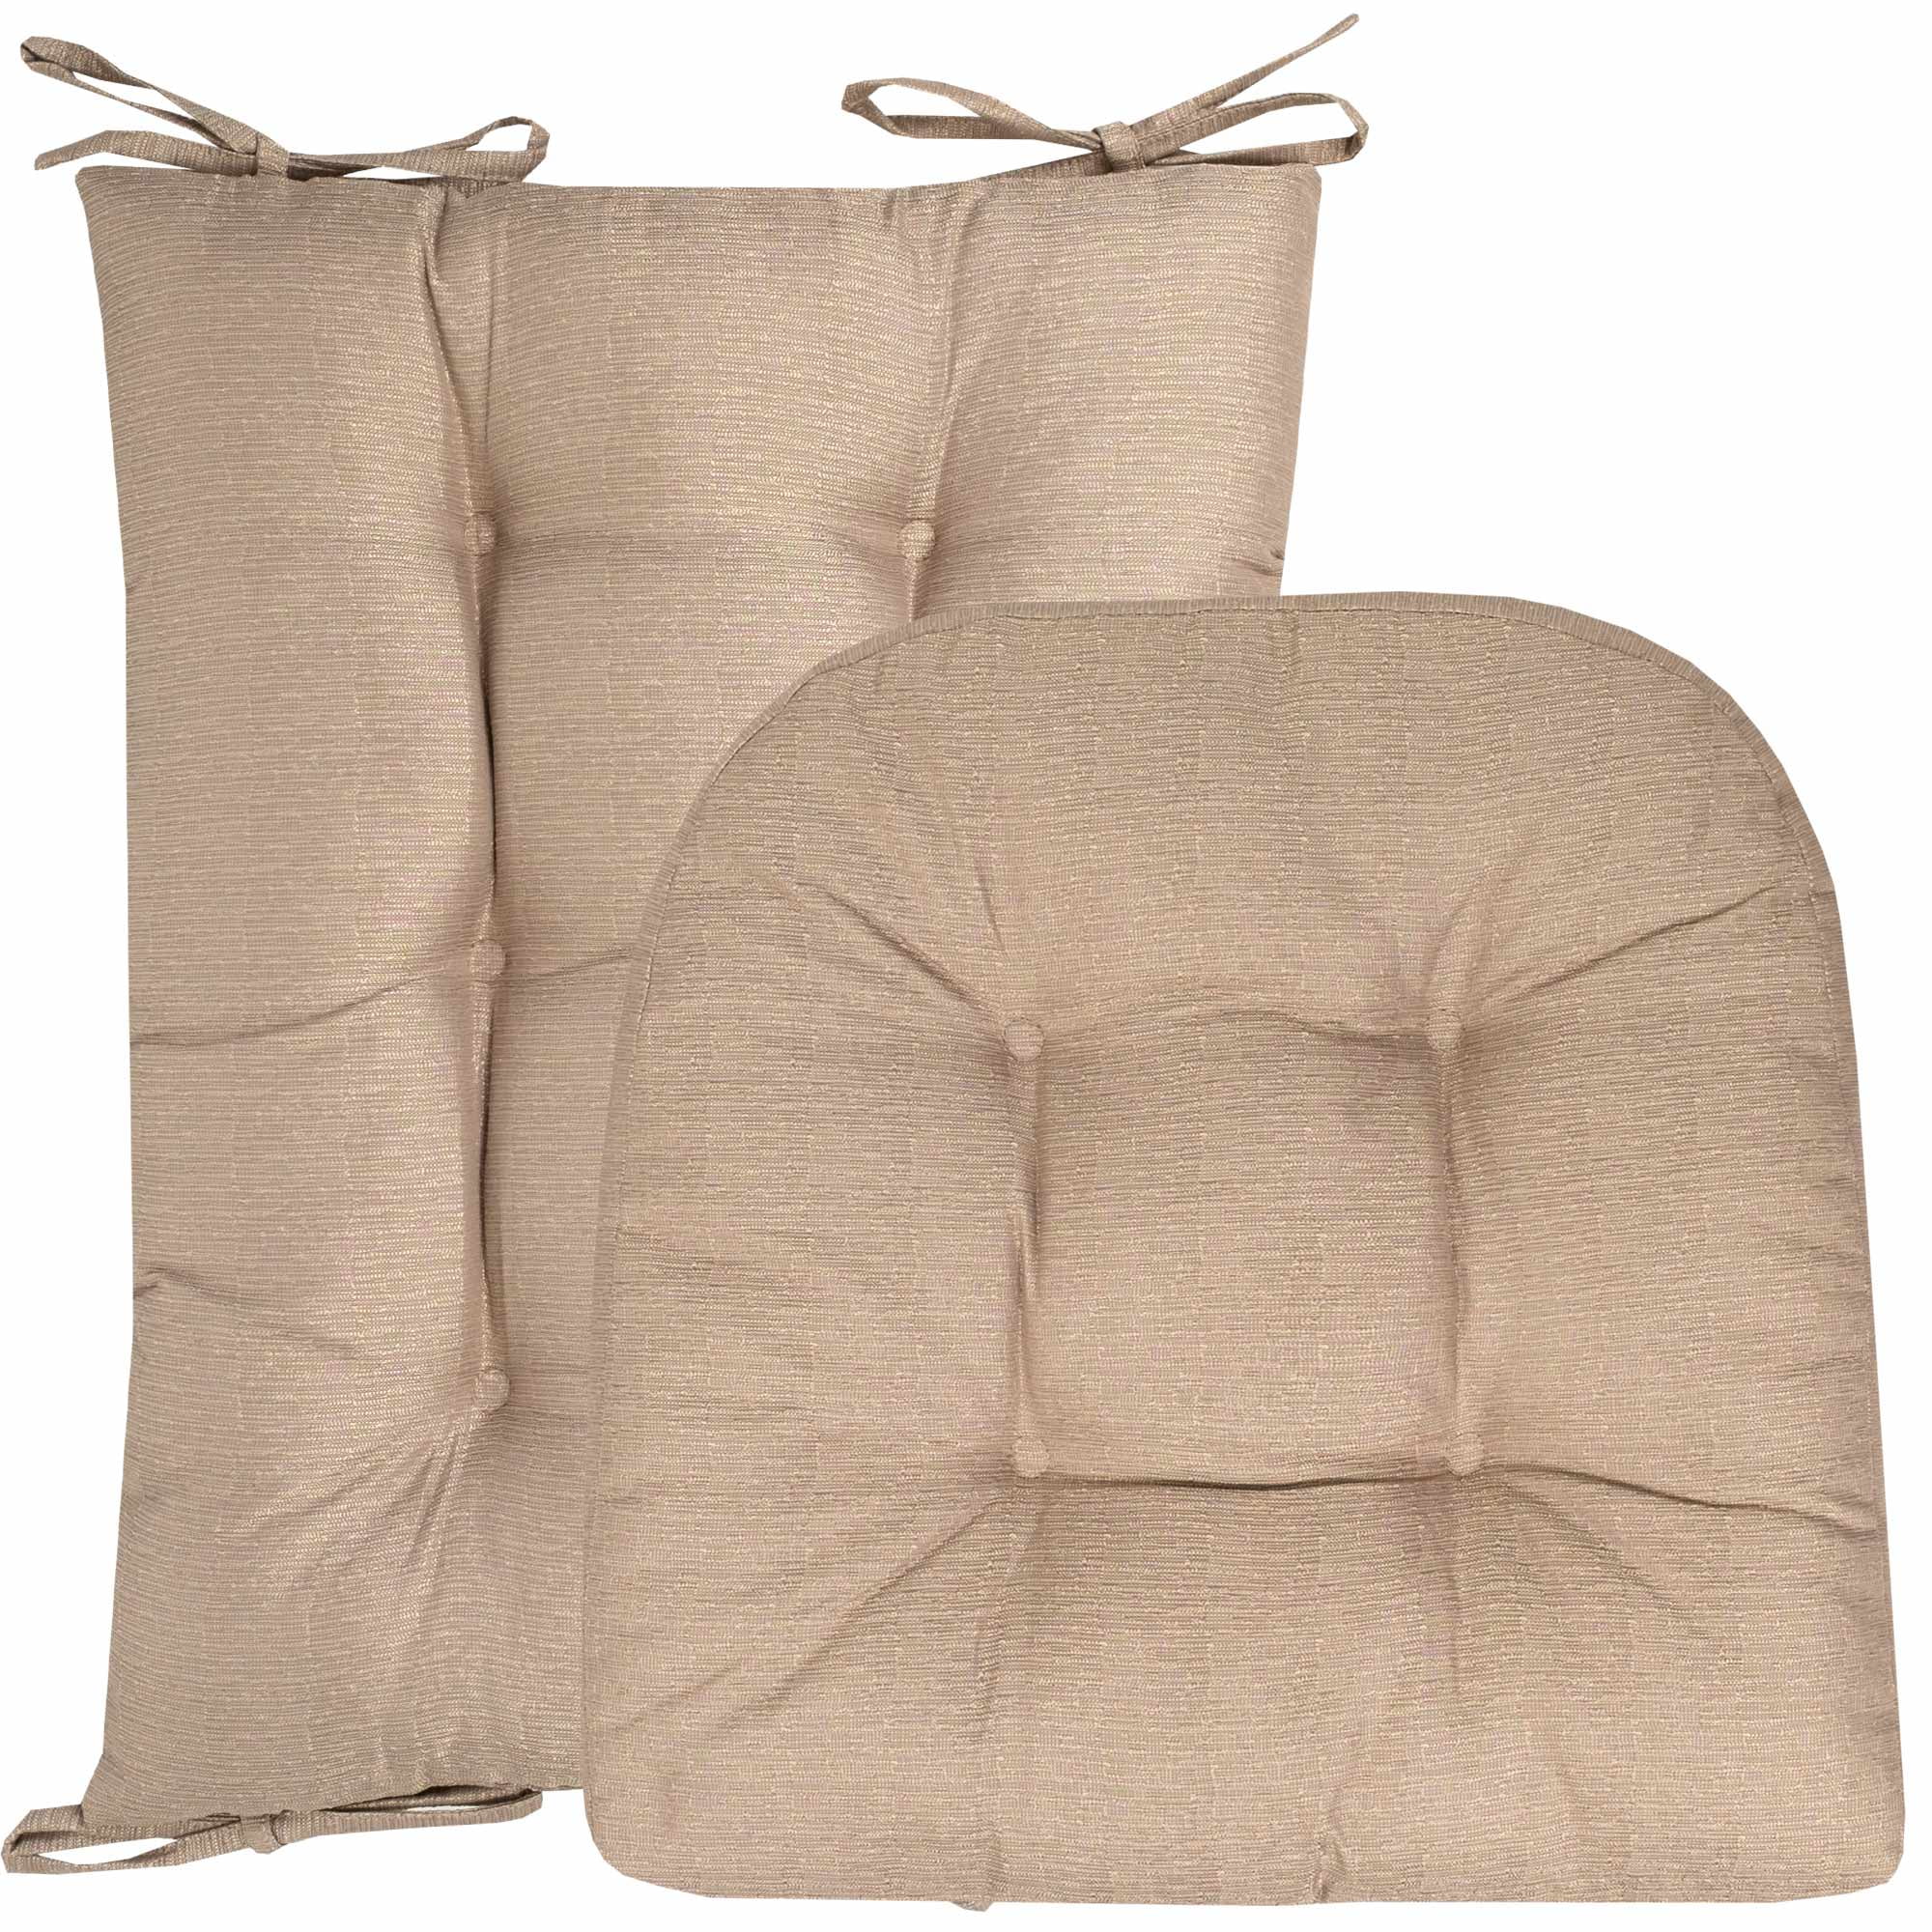 Sweet Home Collection  Memory Foam Tufted Chair Cushion Non Slip Rubber  Back, Taupe, 4 PK, 4PK - Kroger